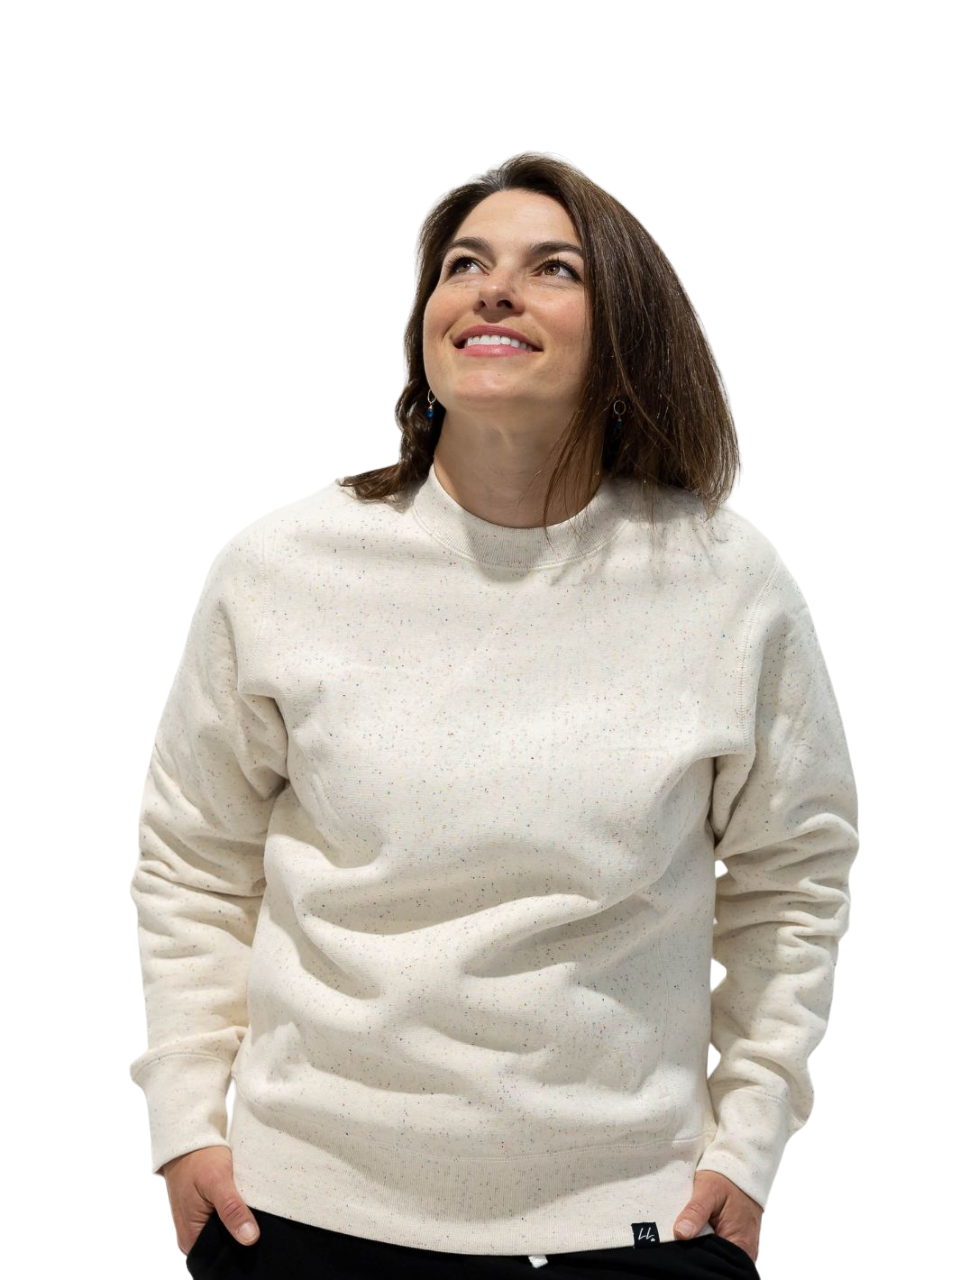 Individual sporting Local Laundry's heavyweight speckled crewneck sweater. This sweater is made of 100% ethically sourced cotton and is sustainably made in Canada